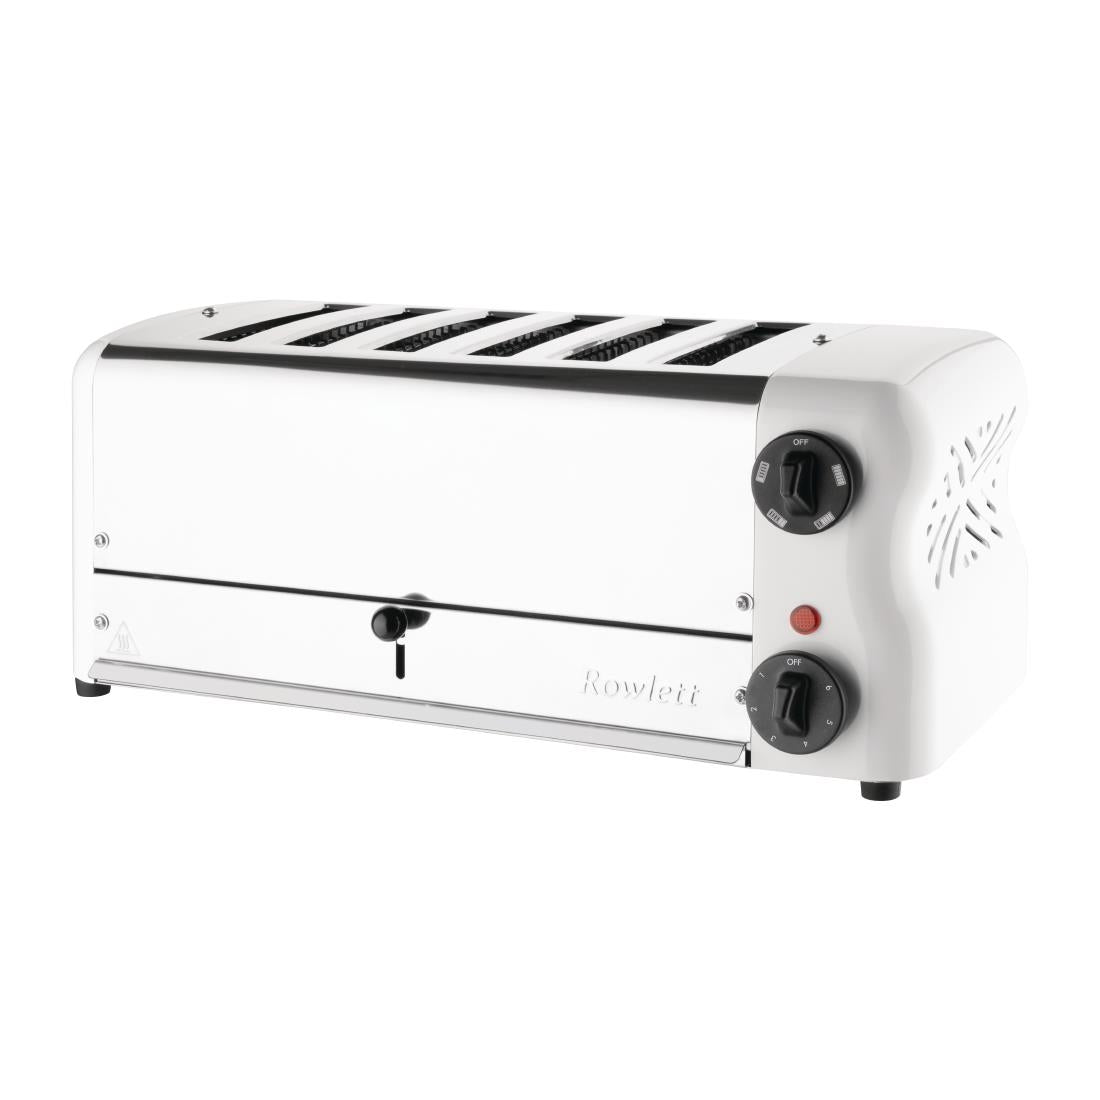 CH186 Rowlett Esprit Toaster White 6 Slot w/2x Additional Elements & Sandwich Cage JD Catering Equipment Solutions Ltd